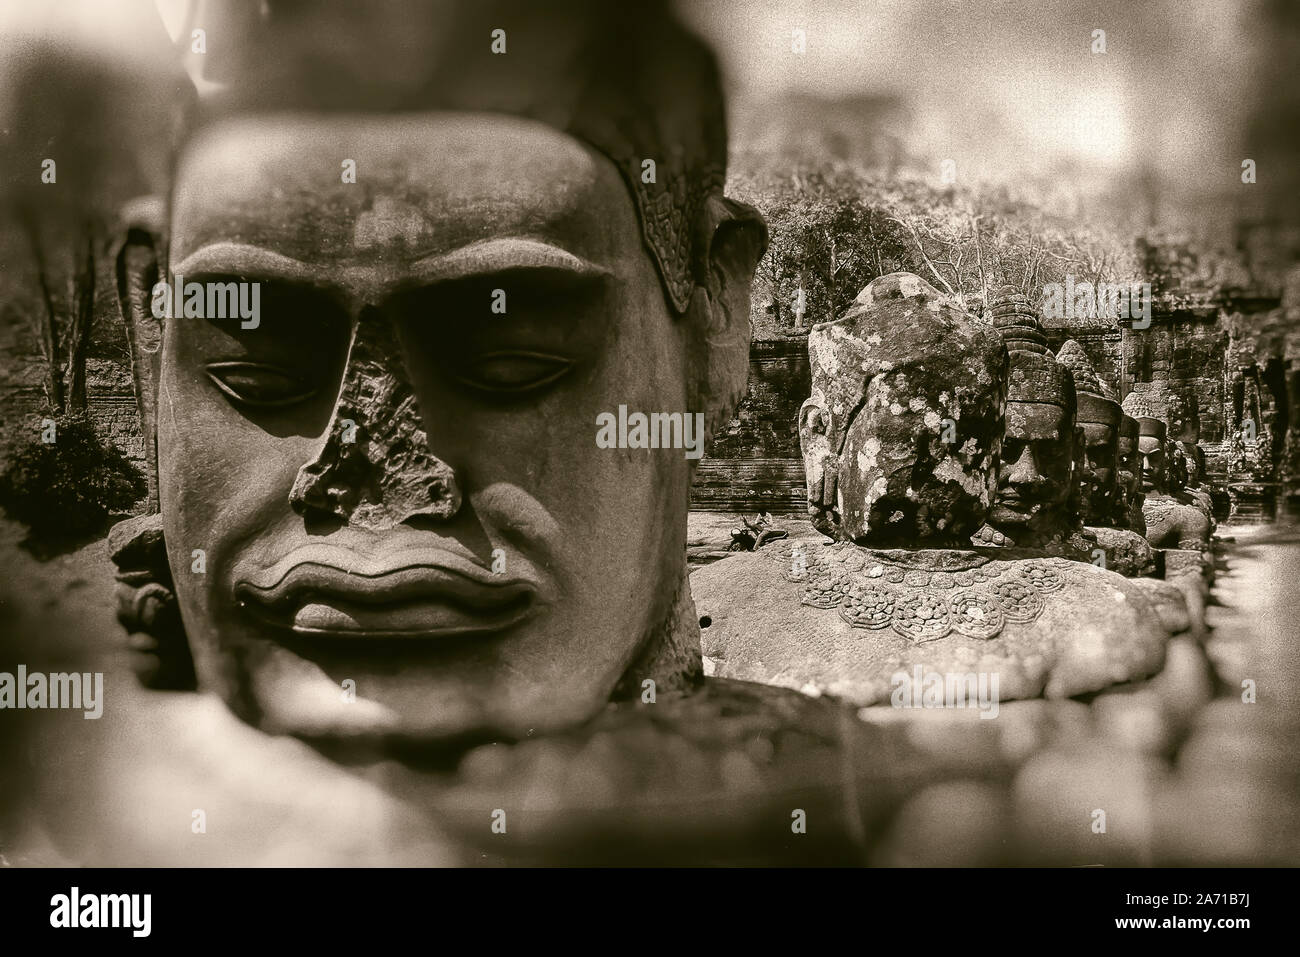 Cambodia, Angkor Thom: Khmer sculpture of the Gods on the Causeway at South Gate at Angkor Thom. Stock Photo